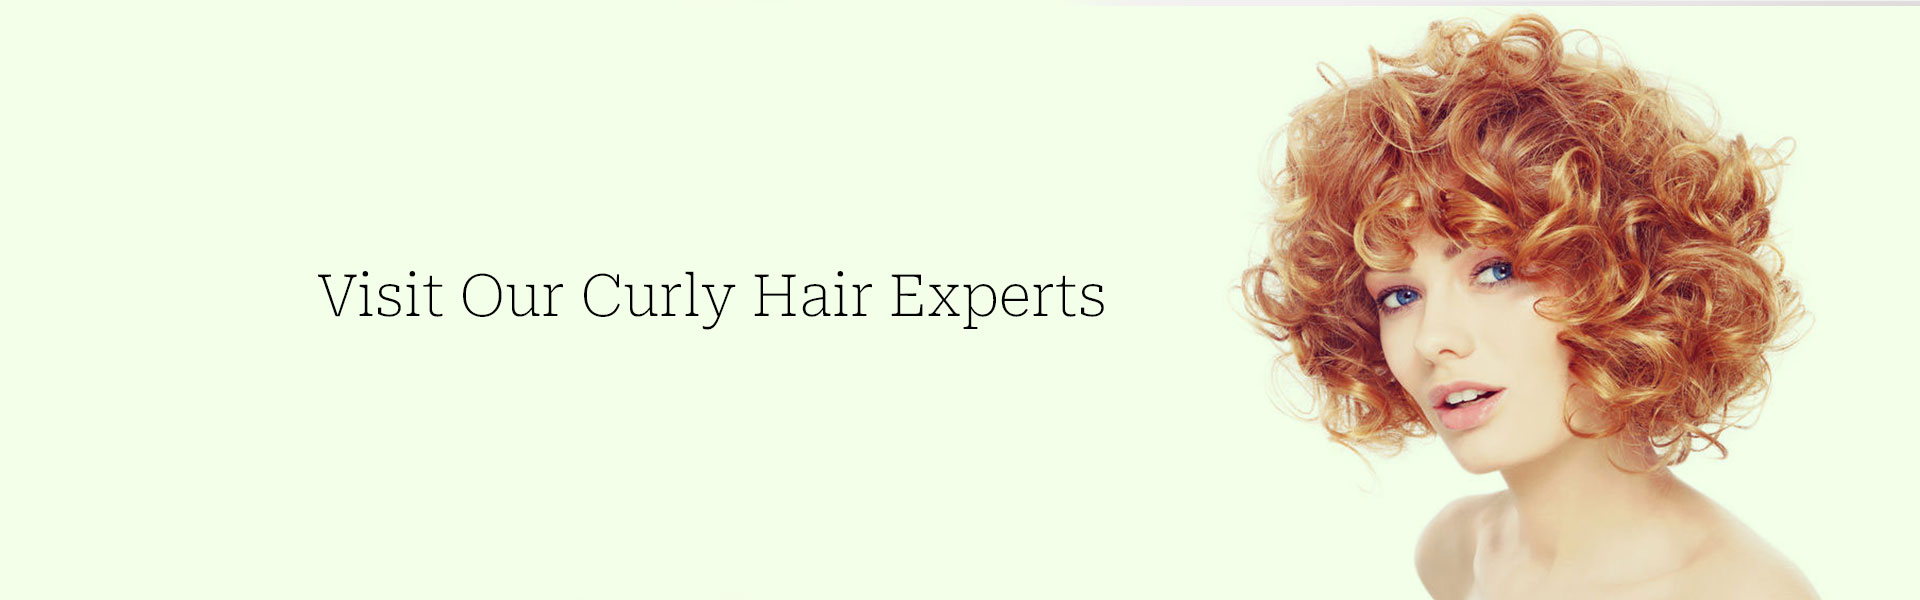 Visit Our Curly Hair Experts BANNER Daily 2